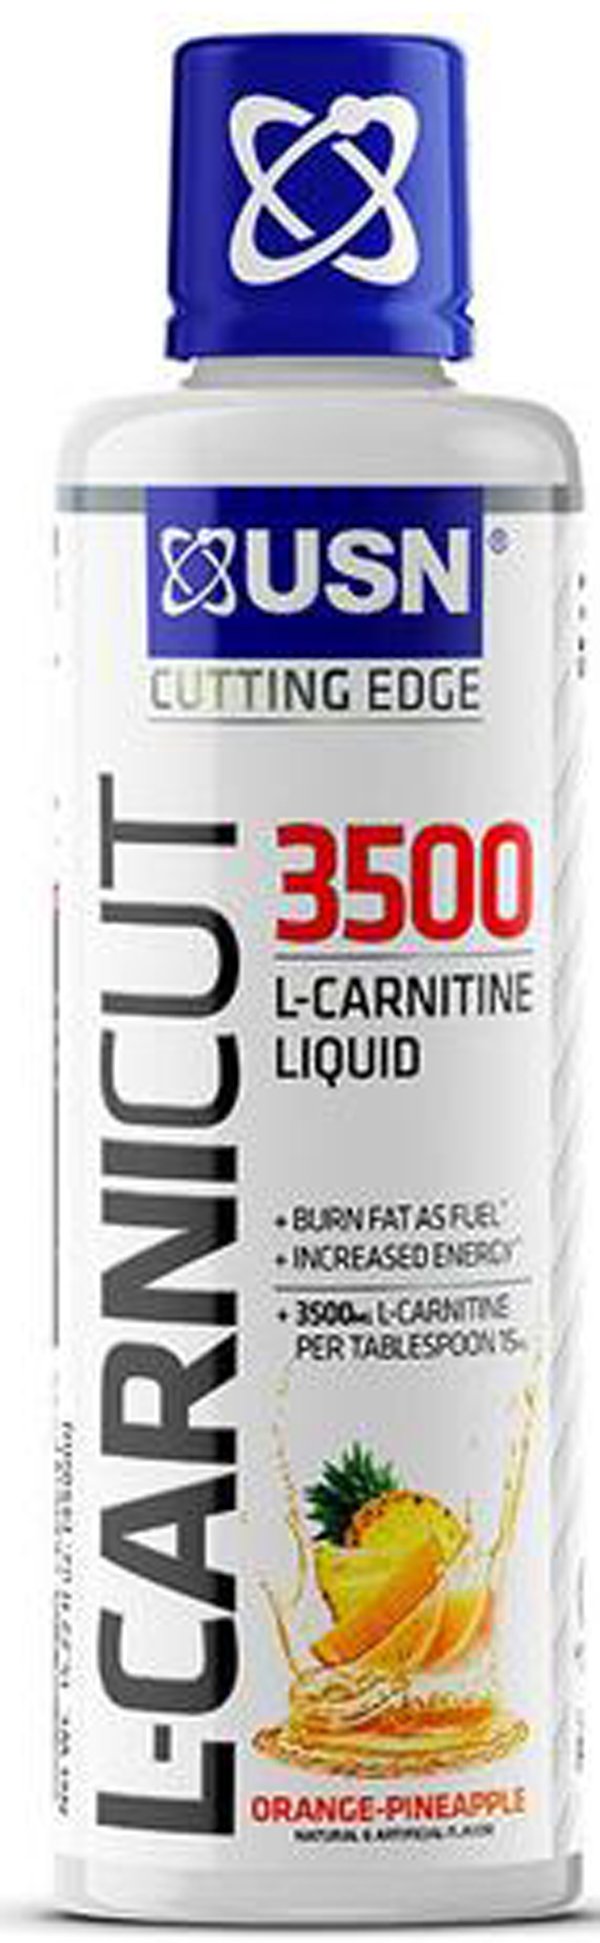 L-Carnitine and CLA Supplements - Low-Price-Supplements.com